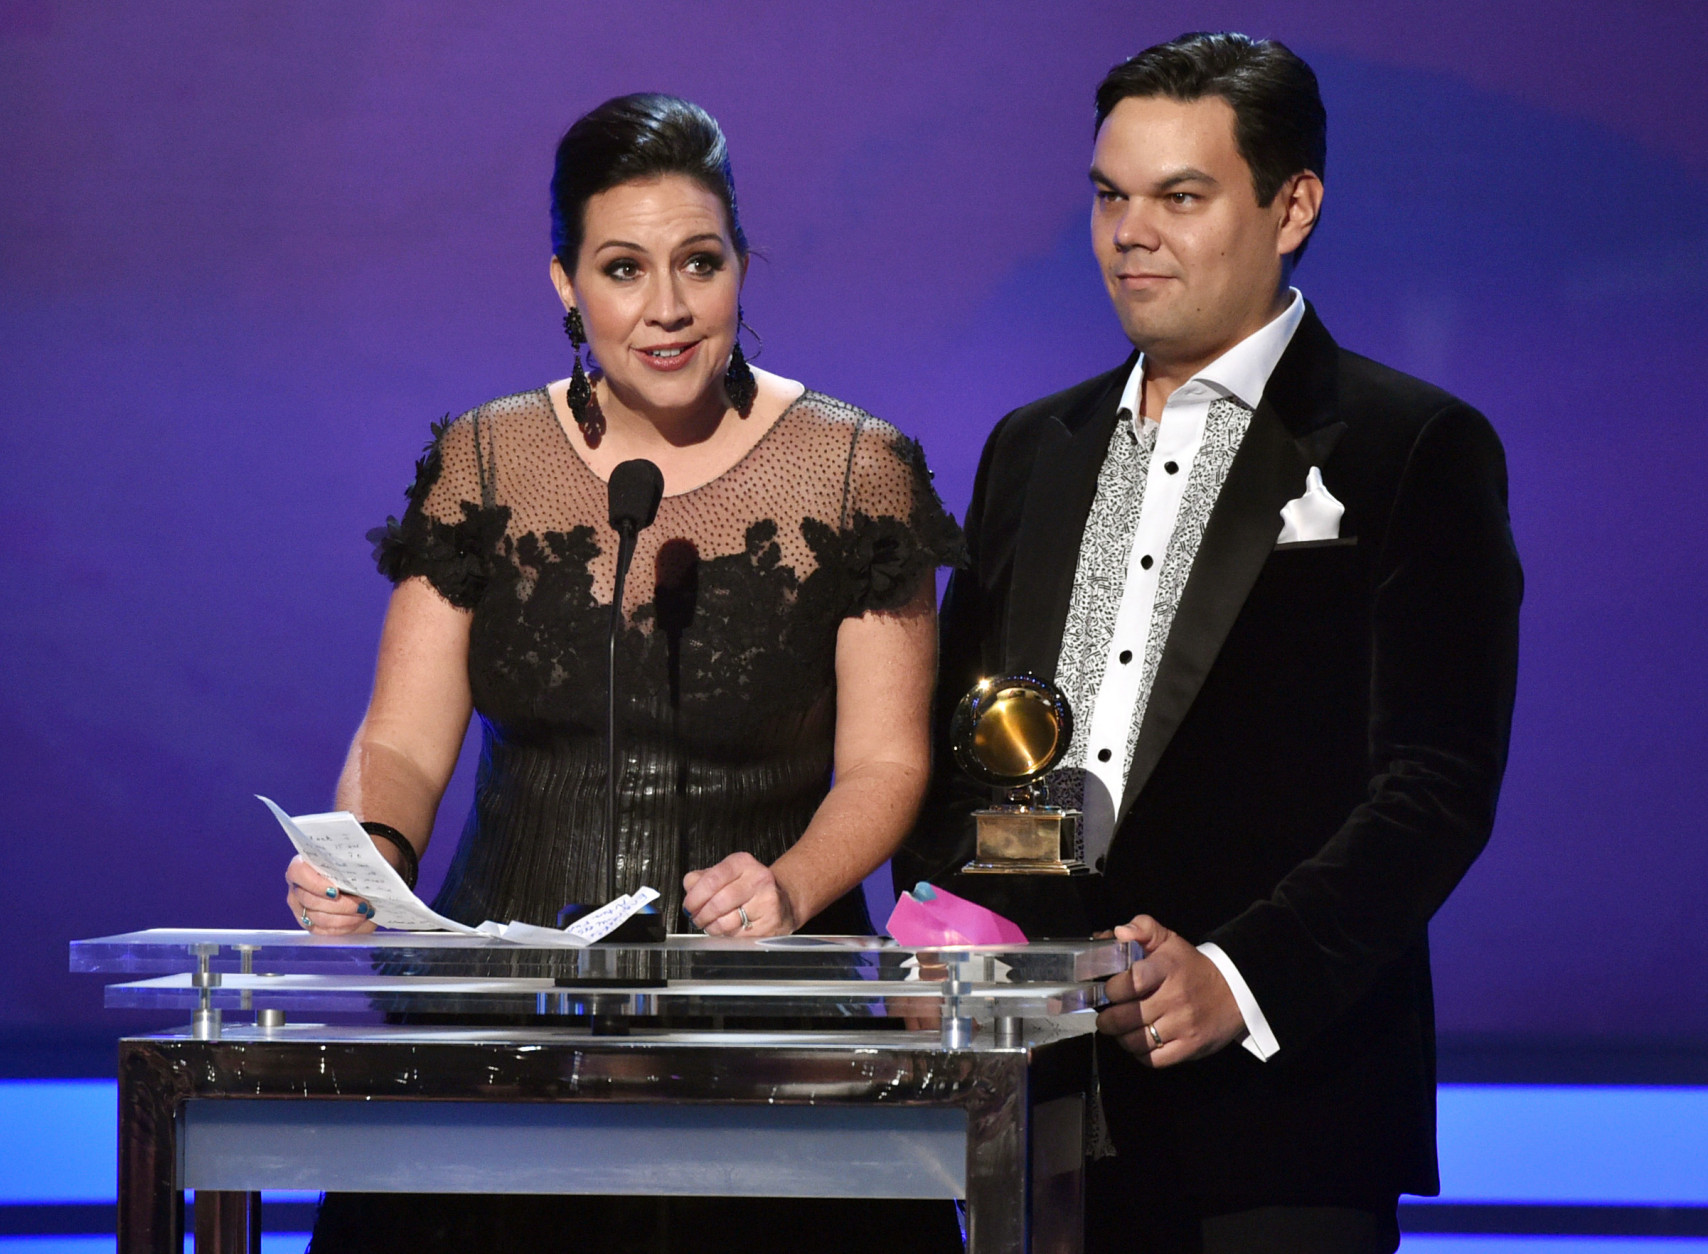 Kristen Anderson-Lopez, left, and Robert Lopez accept the award for best song written for visual media for Let It Go at the 57th annual Grammy Awards on Sunday, Feb. 8, 2015, in Los Angeles. (Photo by John Shearer/Invision/AP)